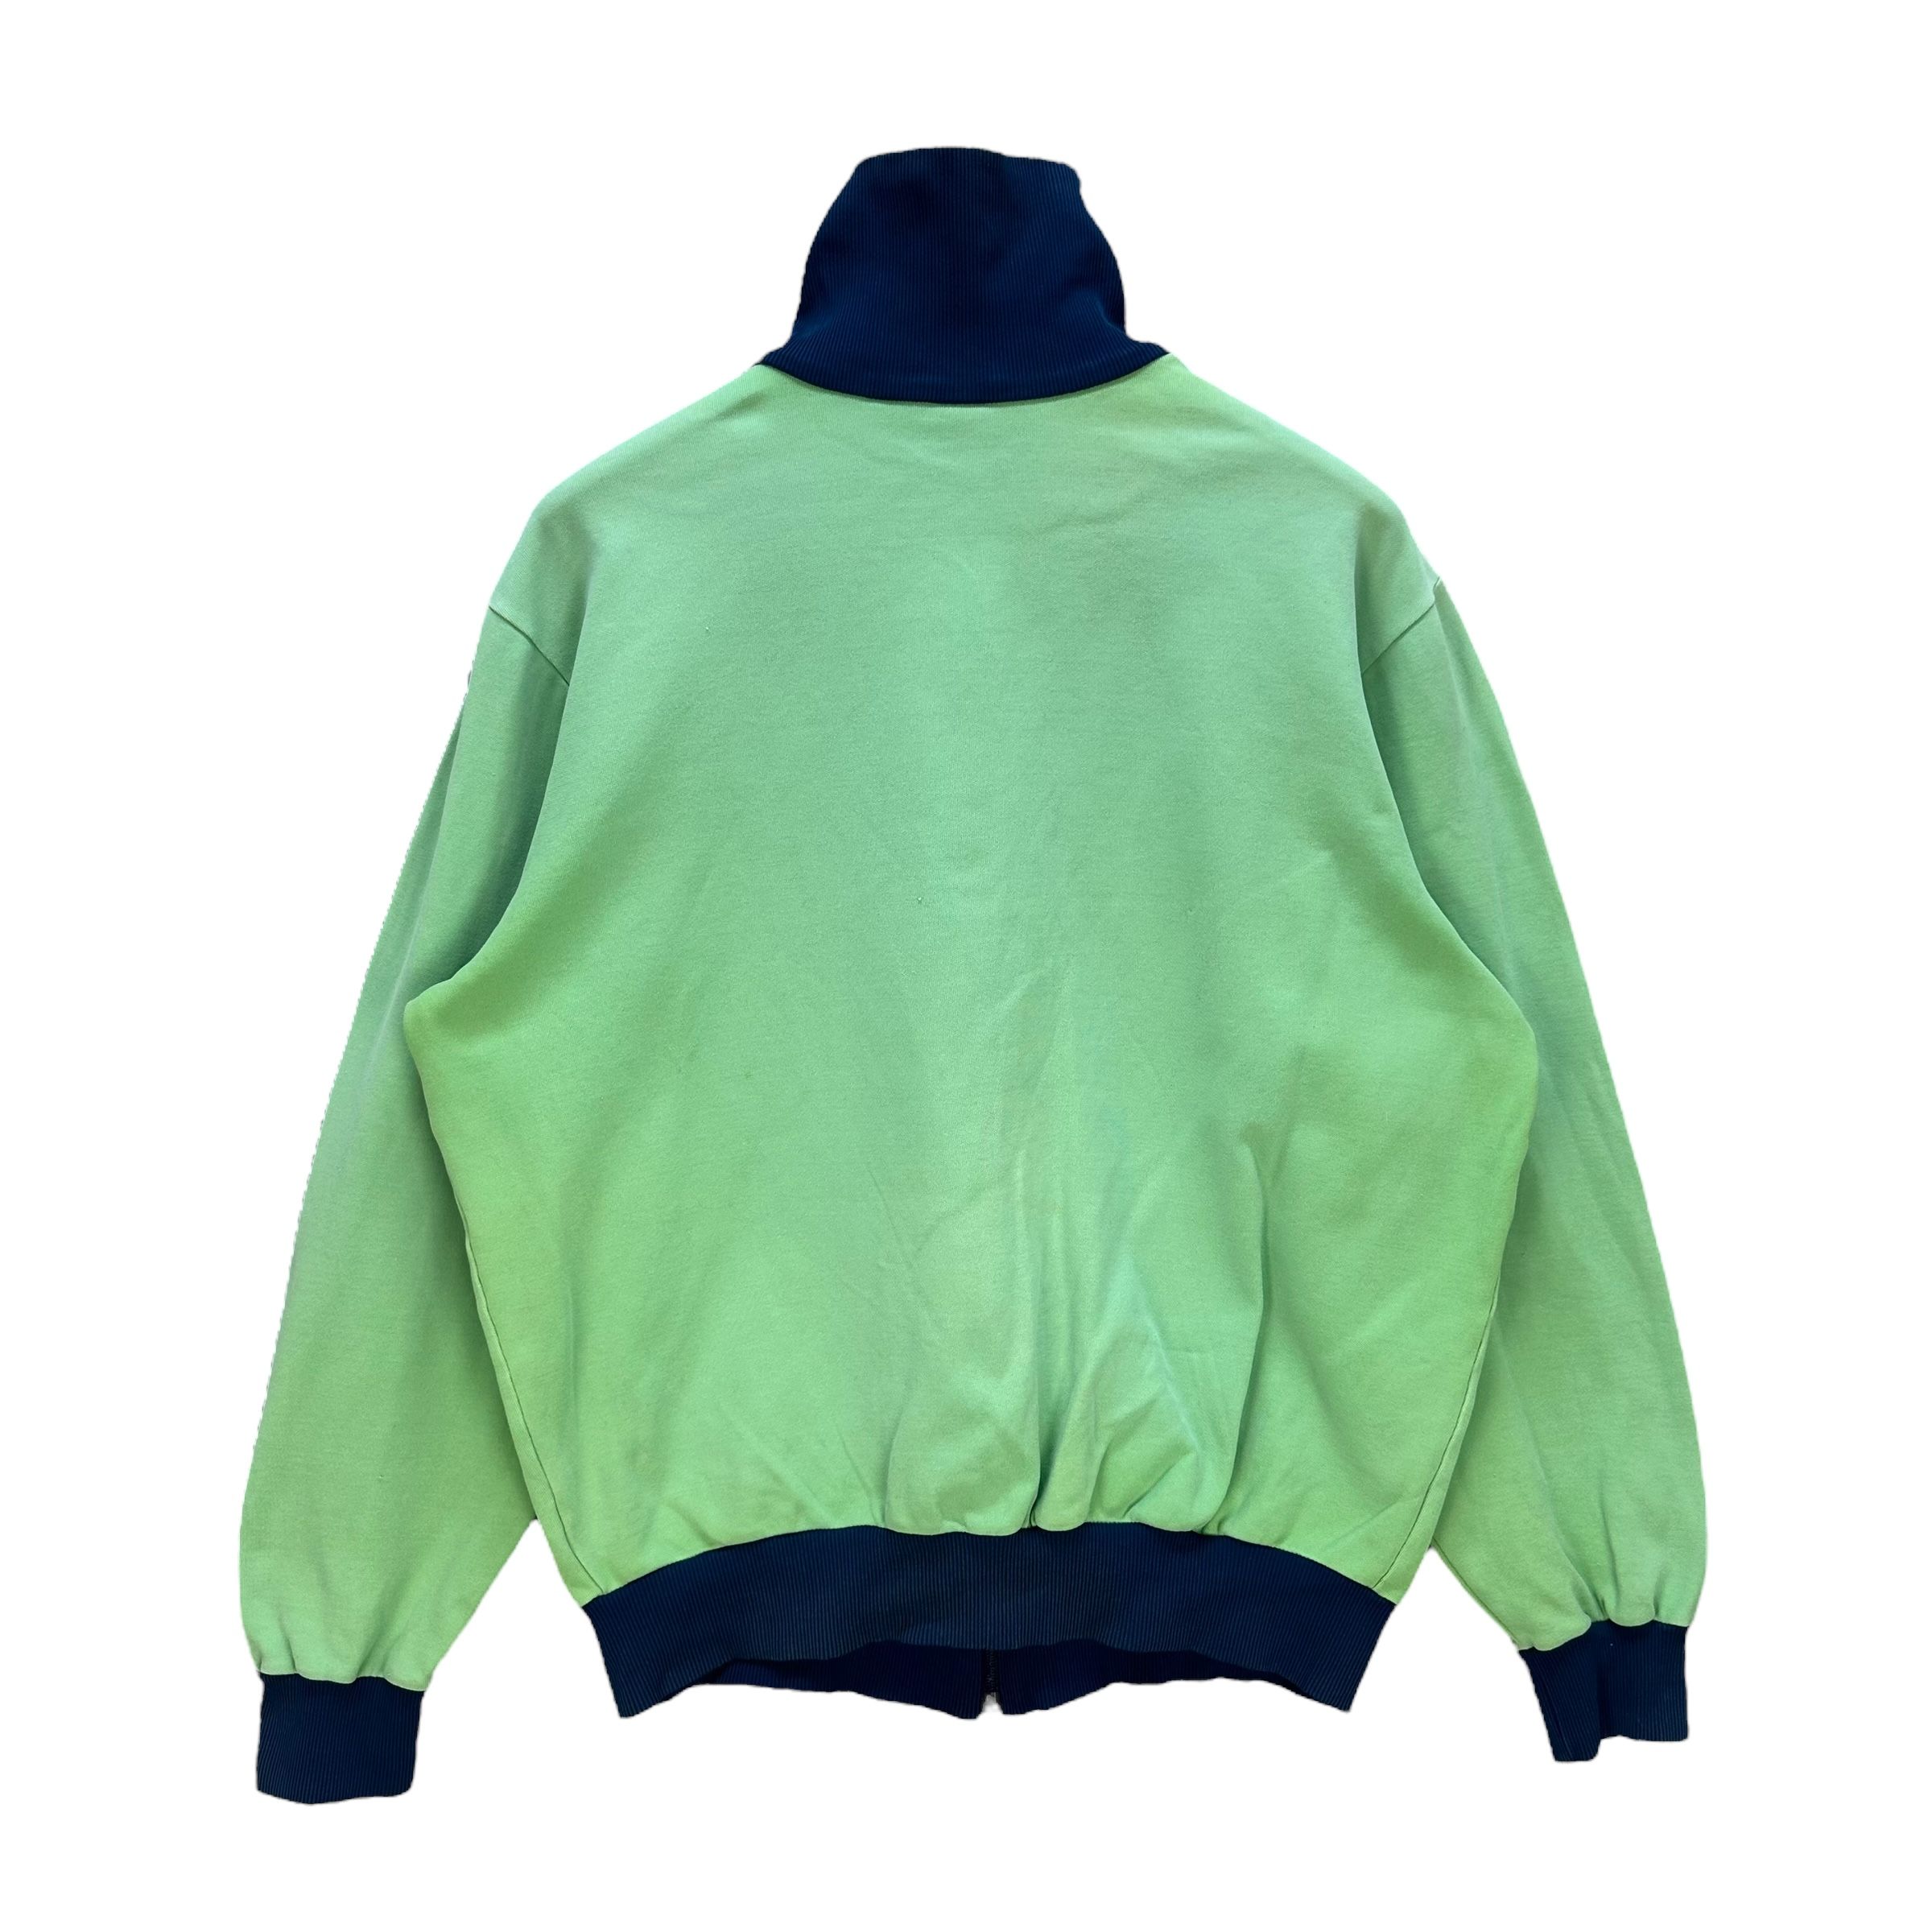 ADIDAS WEST GERMANY GREEN TRACK TOP JACKET #8817-028 - 10